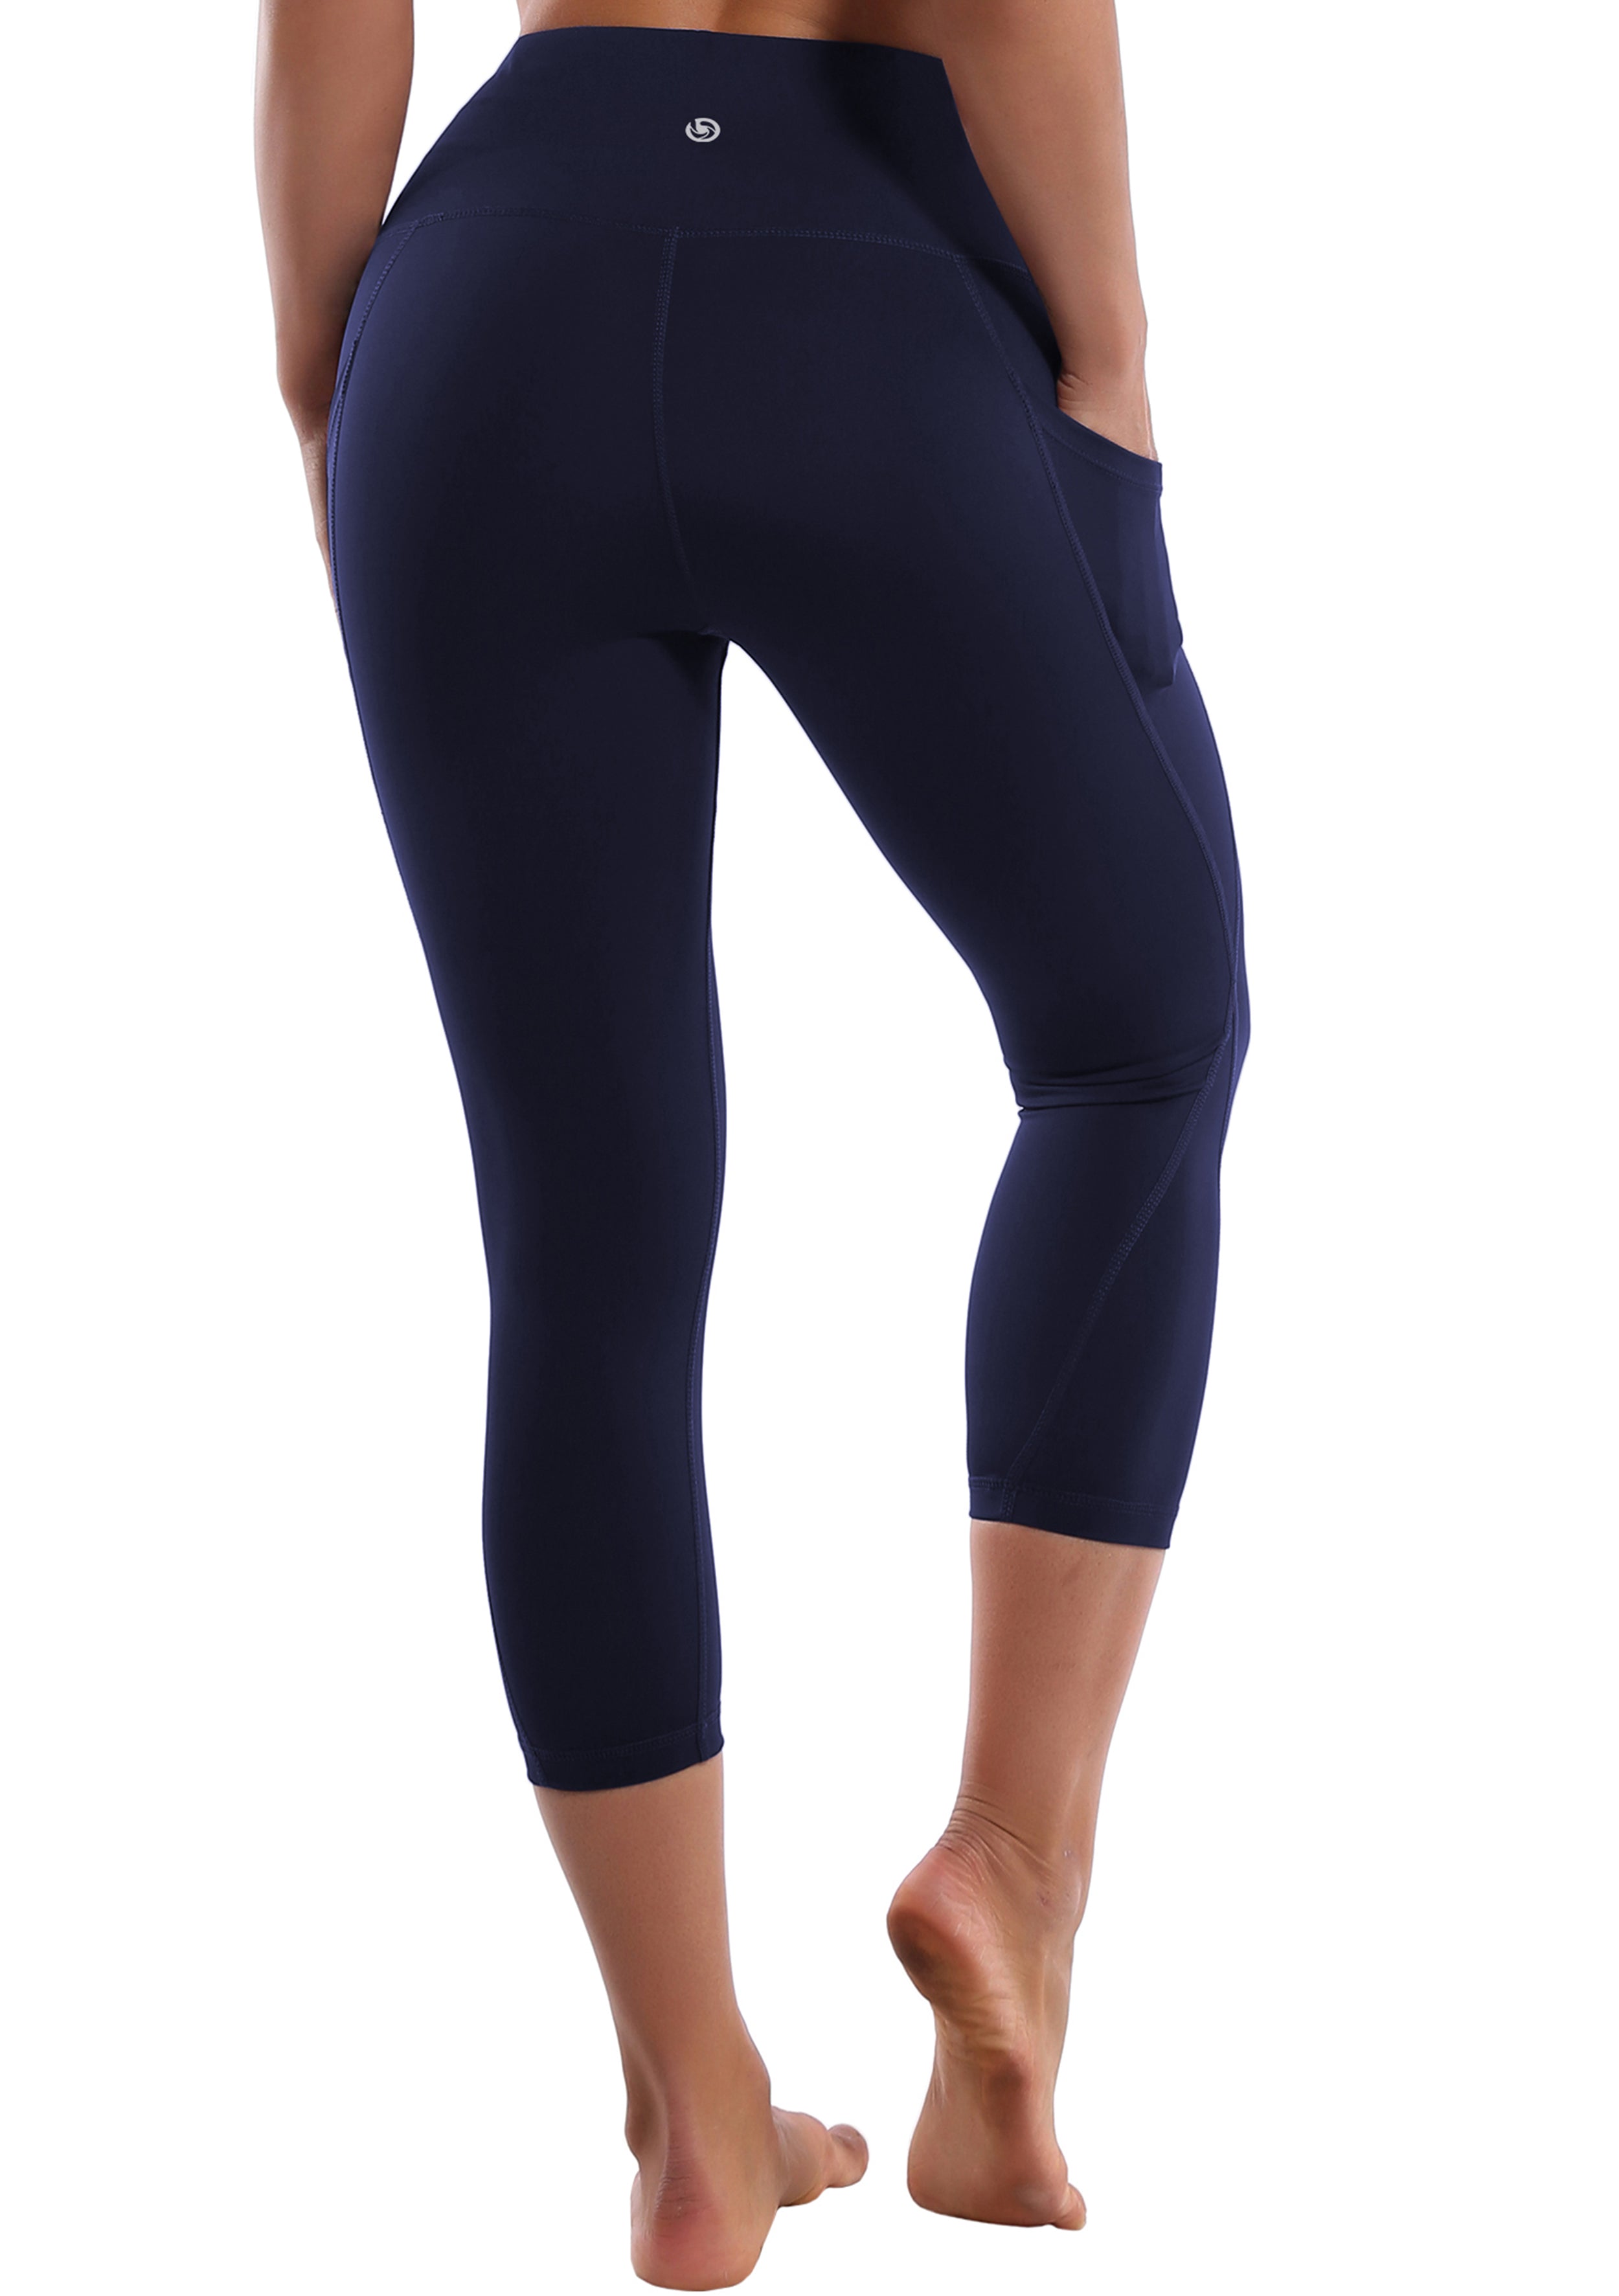 19" High Waist Side Pockets Capris darknavy 75%Nylon/25%Spandex Fabric doesn't attract lint easily 4-way stretch No see-through Moisture-wicking Tummy control Inner pocket